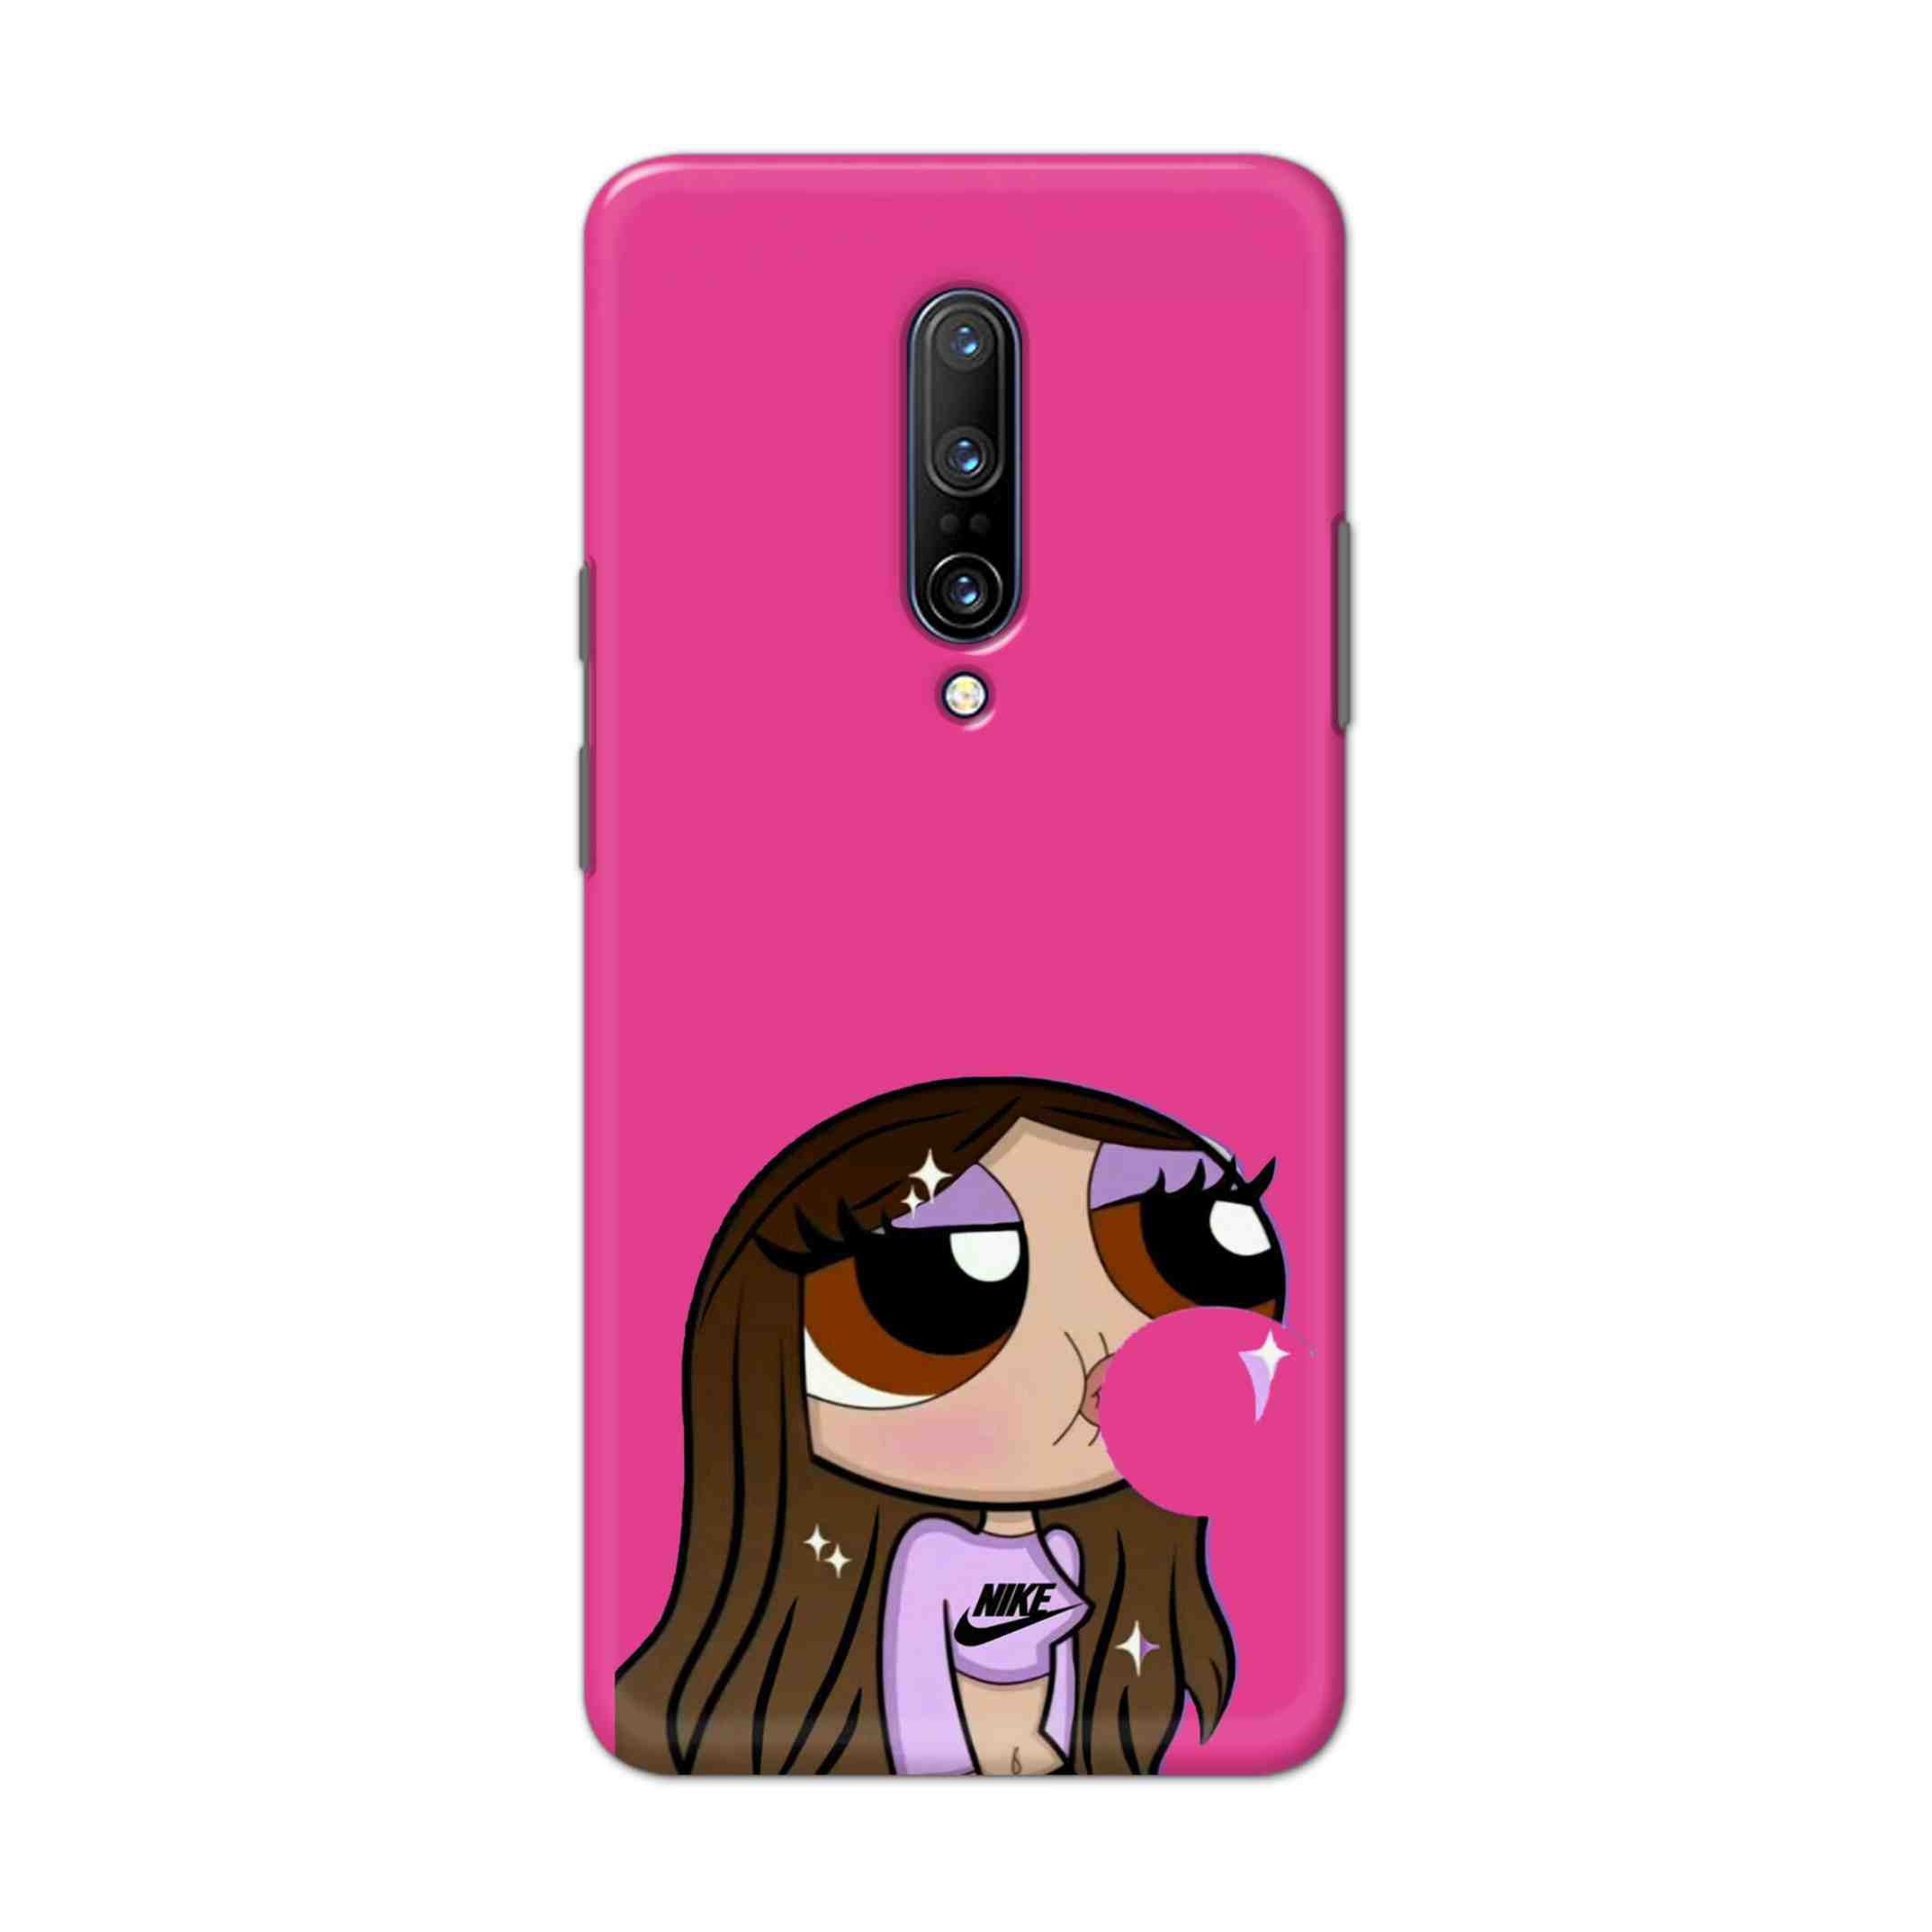 Buy Bubble Girl Hard Back Mobile Phone Case Cover For OnePlus 7 Pro Online